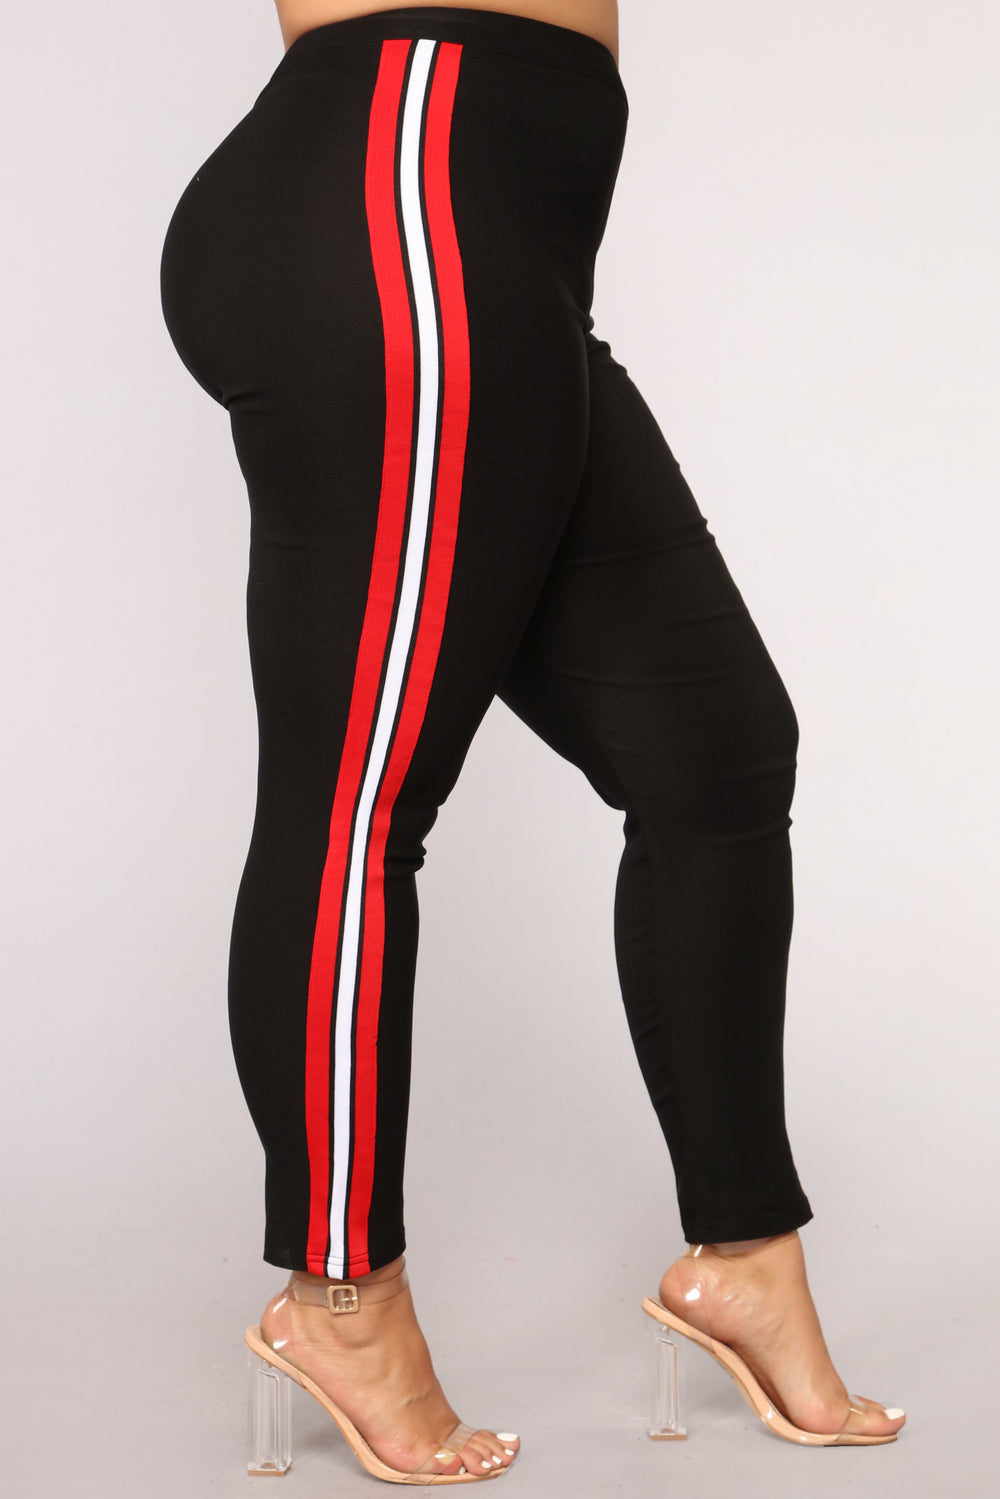 Three Stripe You're Out Pants - Black/Red/White